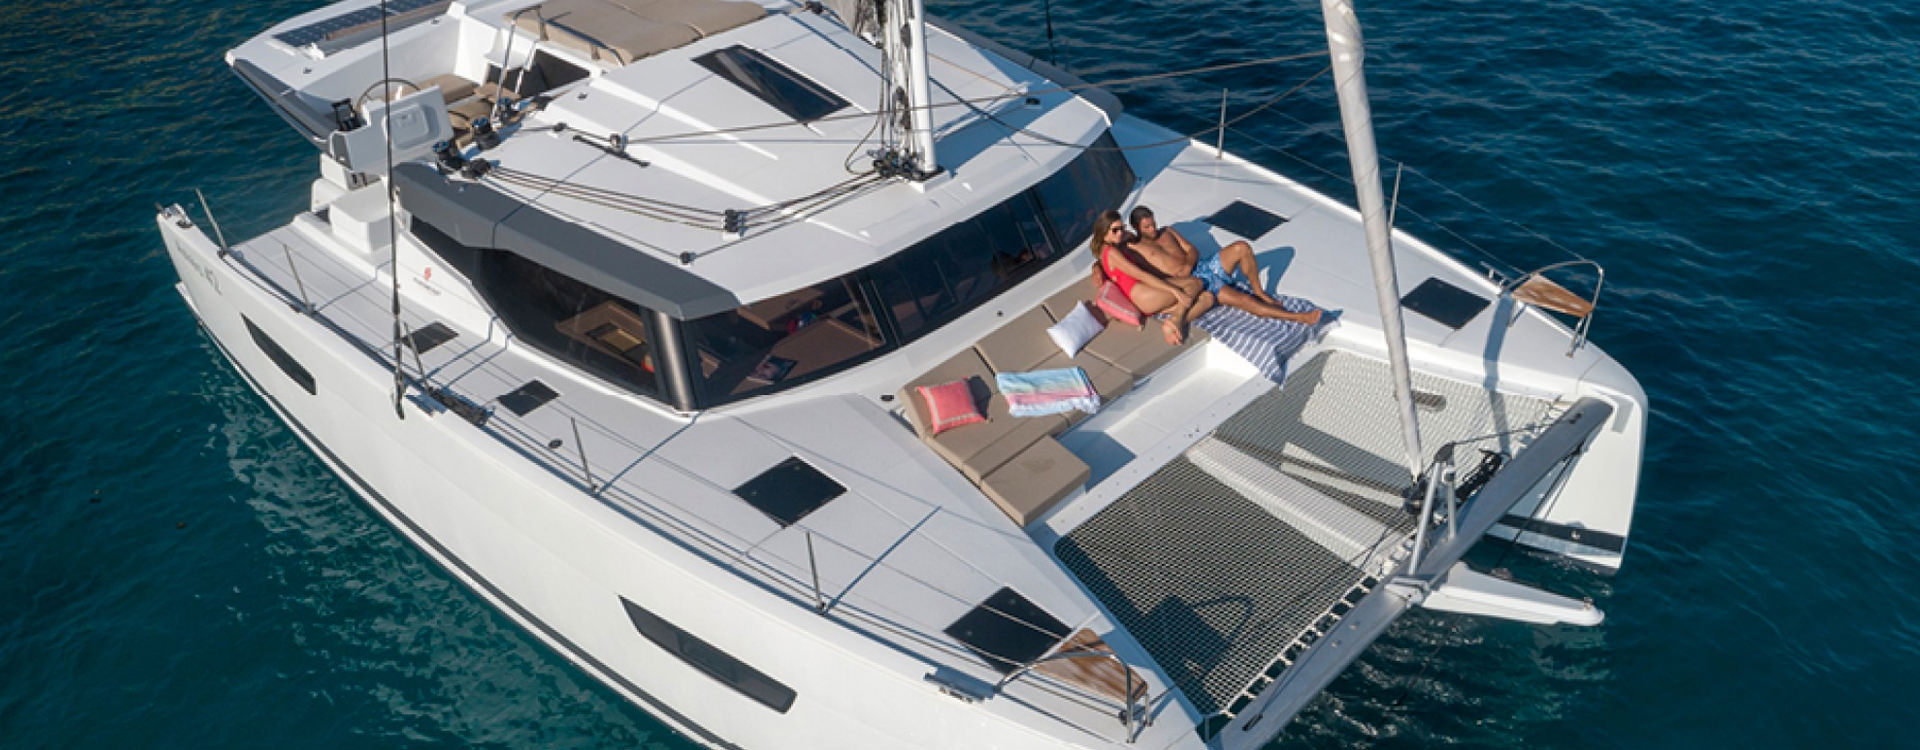 Alni Sailing - Fountaine Pajot Astréa 42 - external view with two people on deck